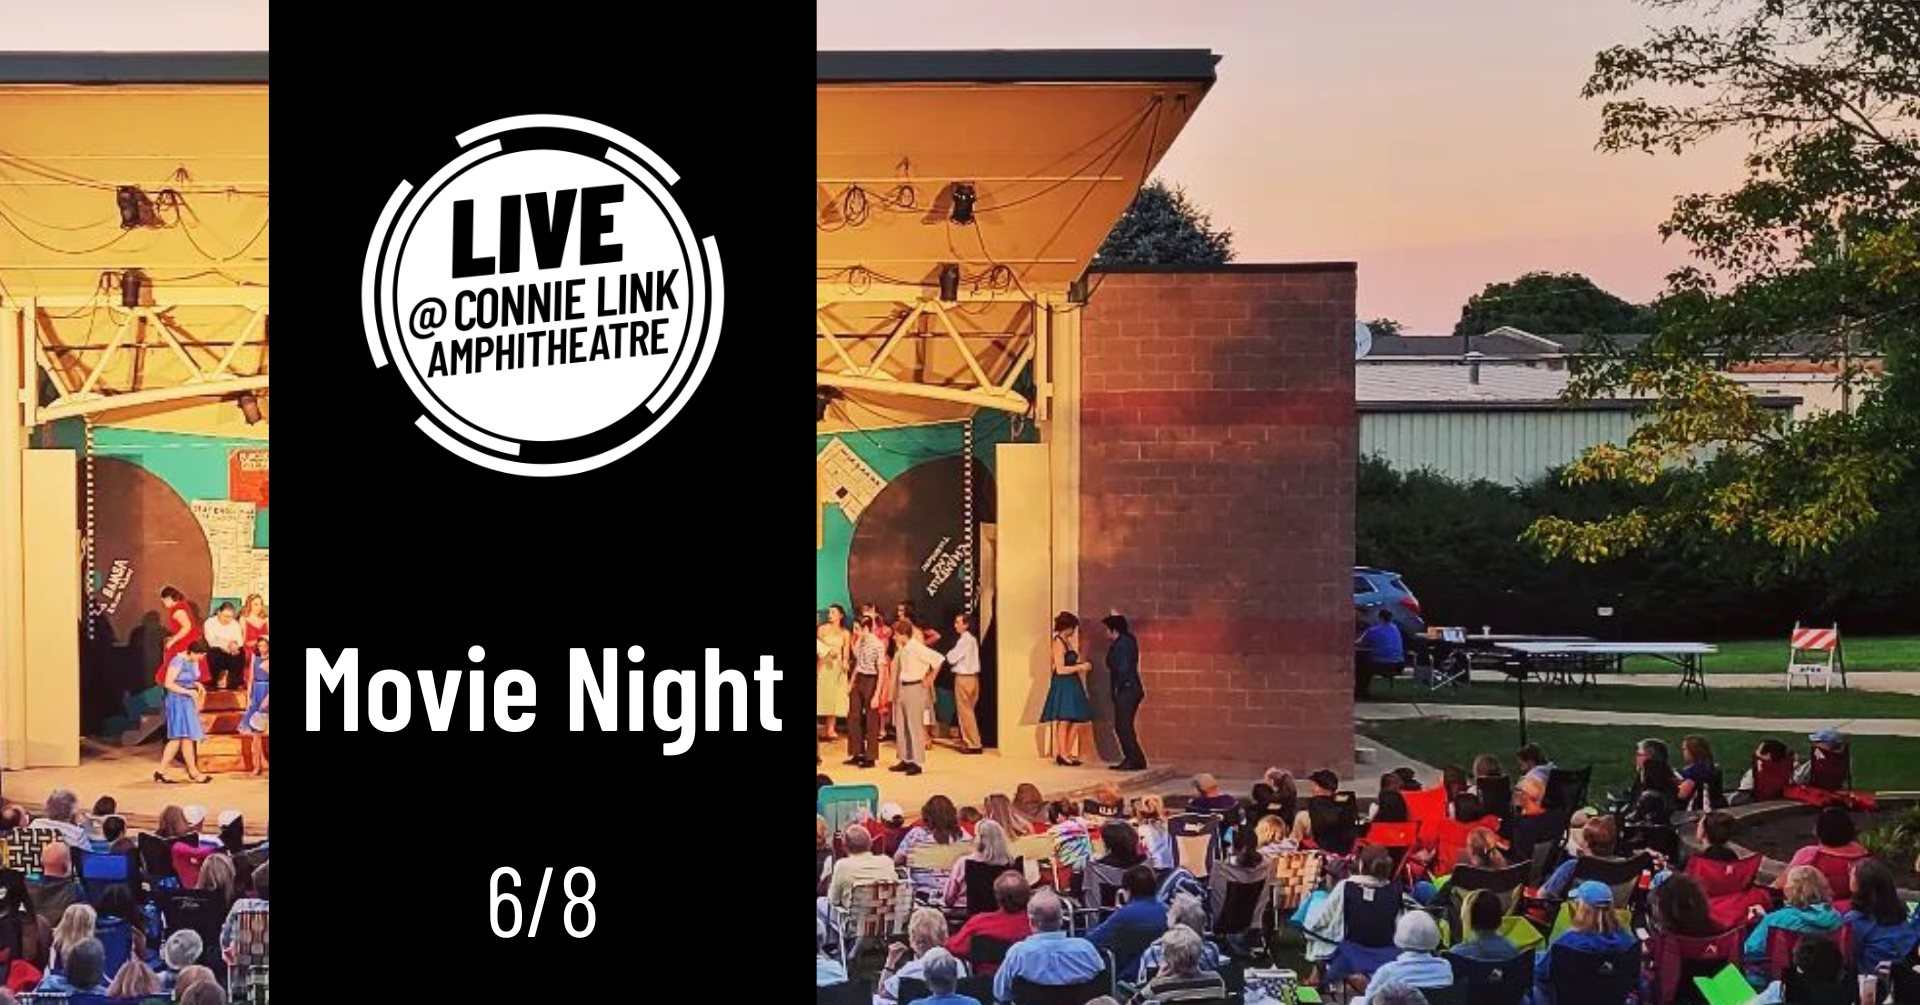 Normal LIVE presents Movie Night at Connie Link Amphitheatre